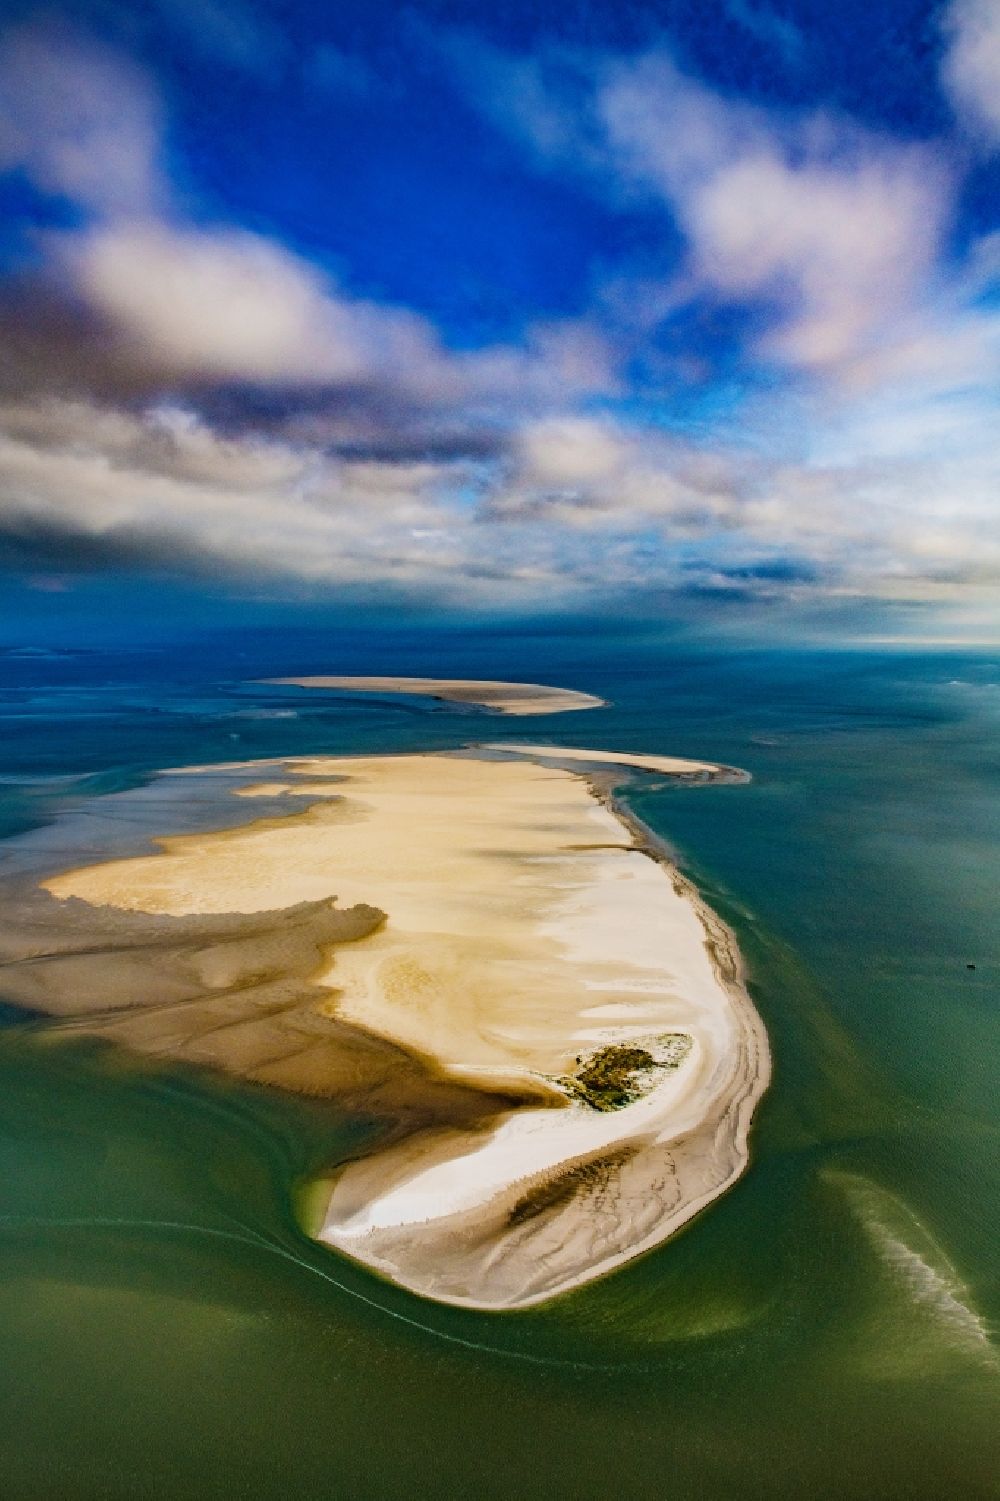 Norderoogsand from the bird's eye view: Sandbank Norderoogsand in the Wadden Sea of a??a??the North Sea in the state Schleswig-Holstein, Germany